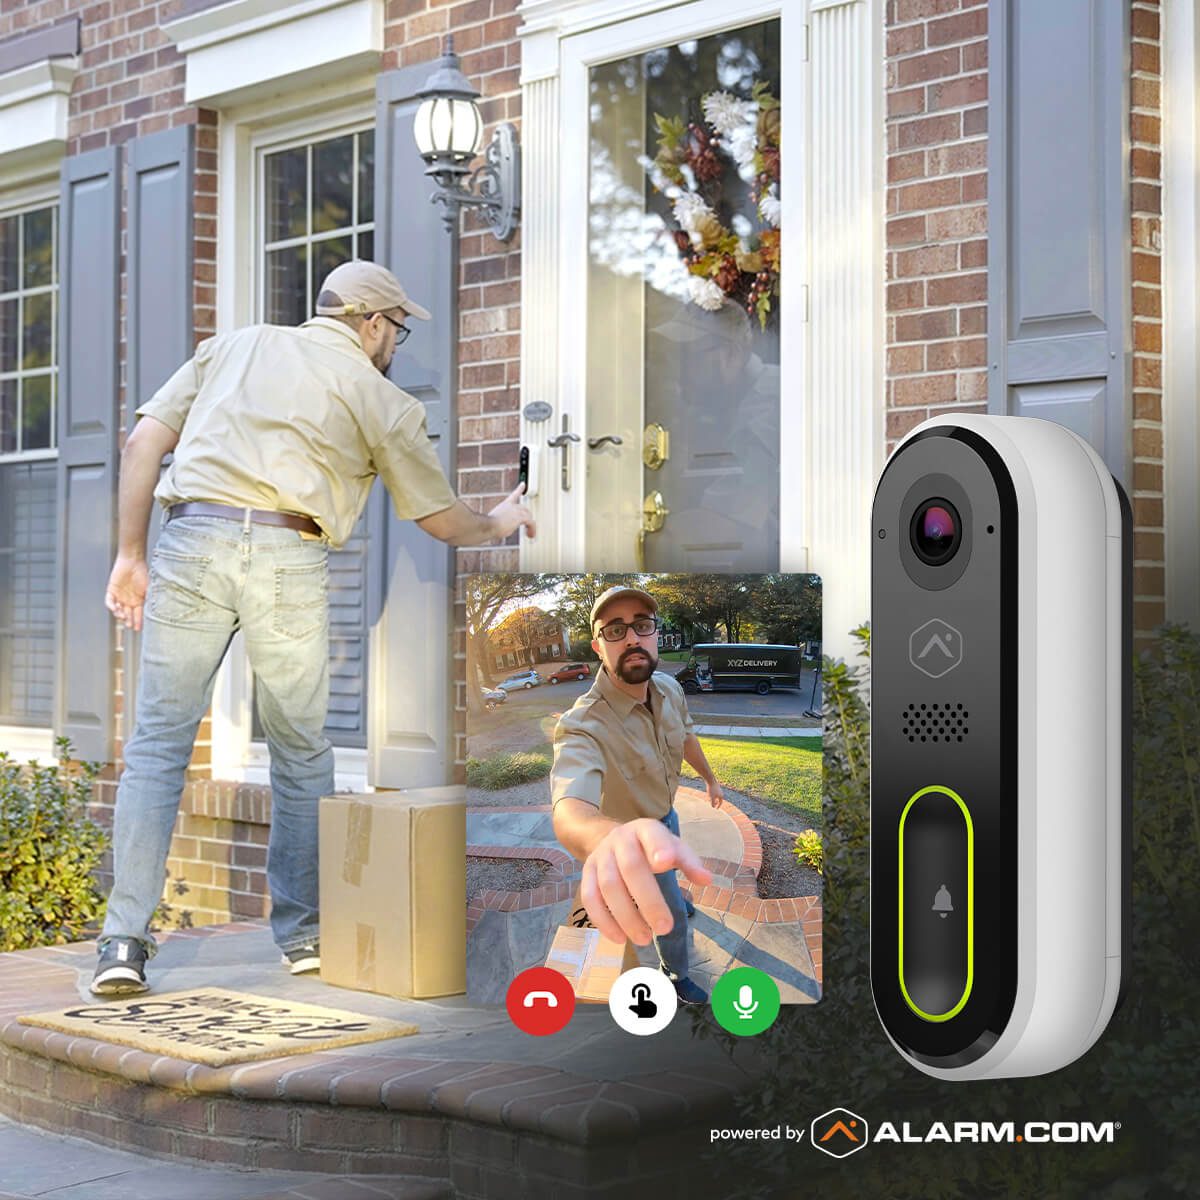 Find the best security system installer for your home